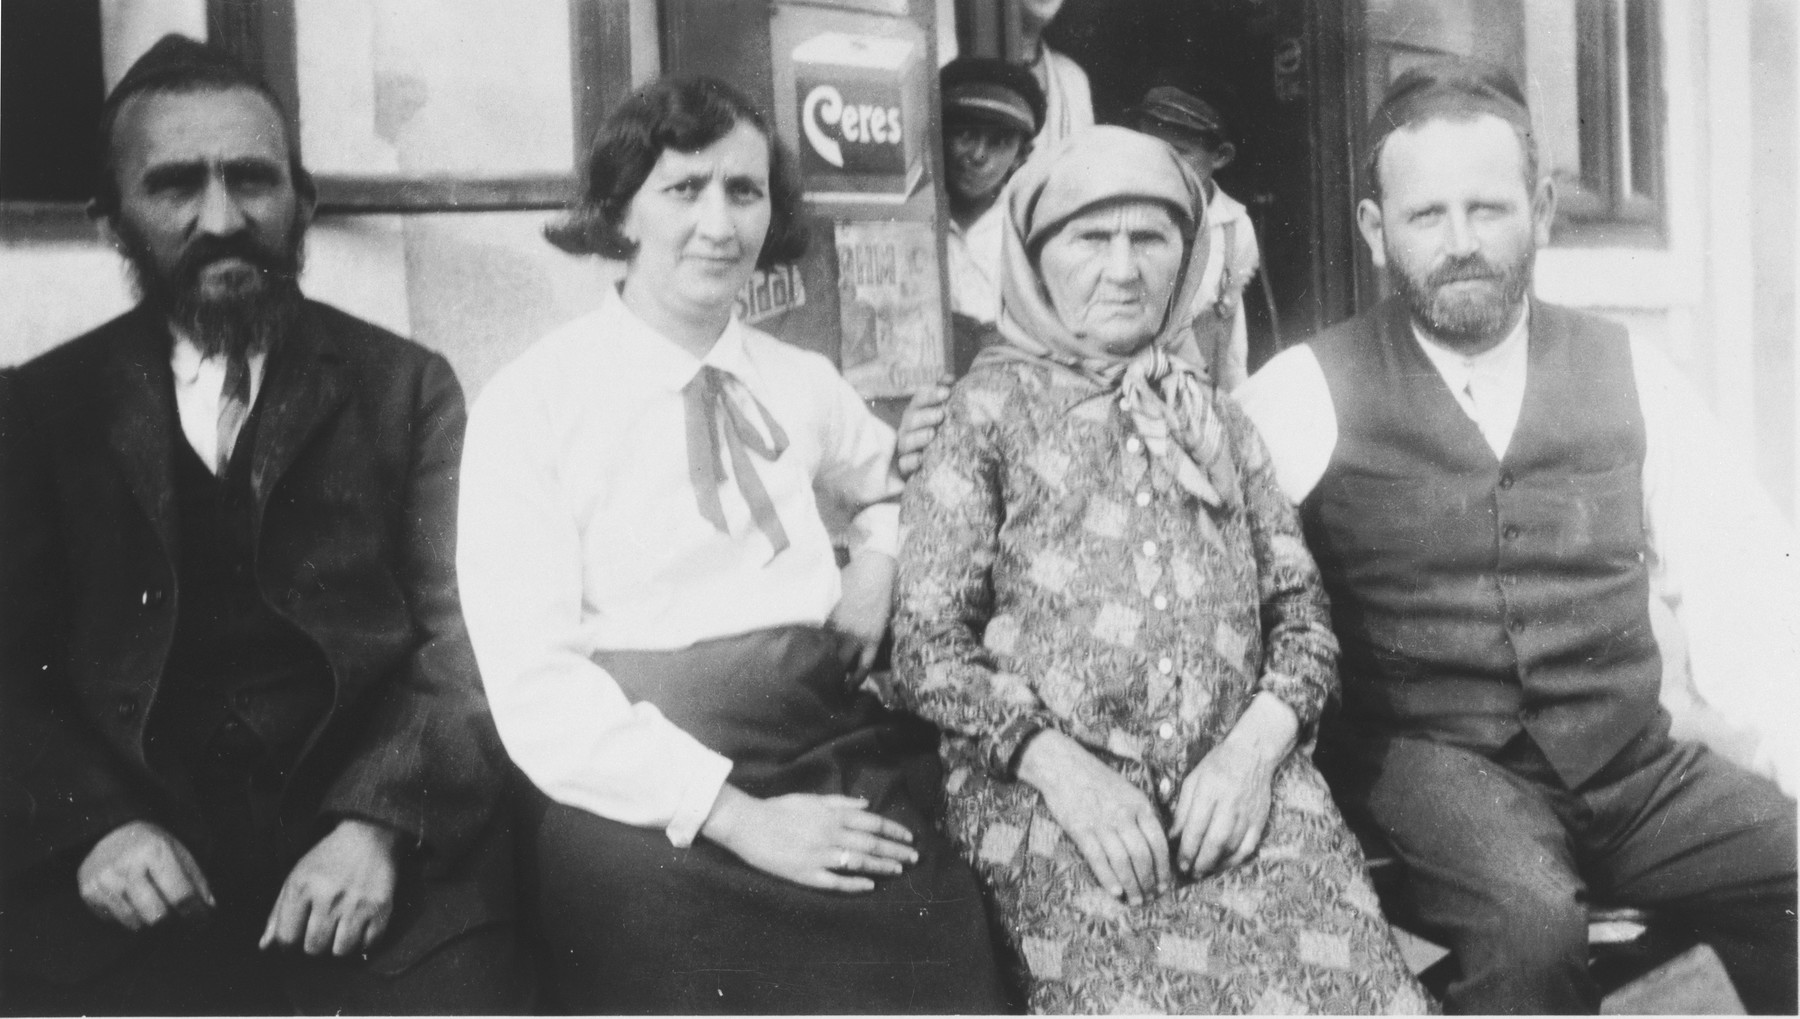 Yetta Beila Gutstein poses with her two sons and daughter-law.

Pictured from left to right are Shmuel Gutstein, his wife Malche, Yetta Beila and Mordecai Gutstein.